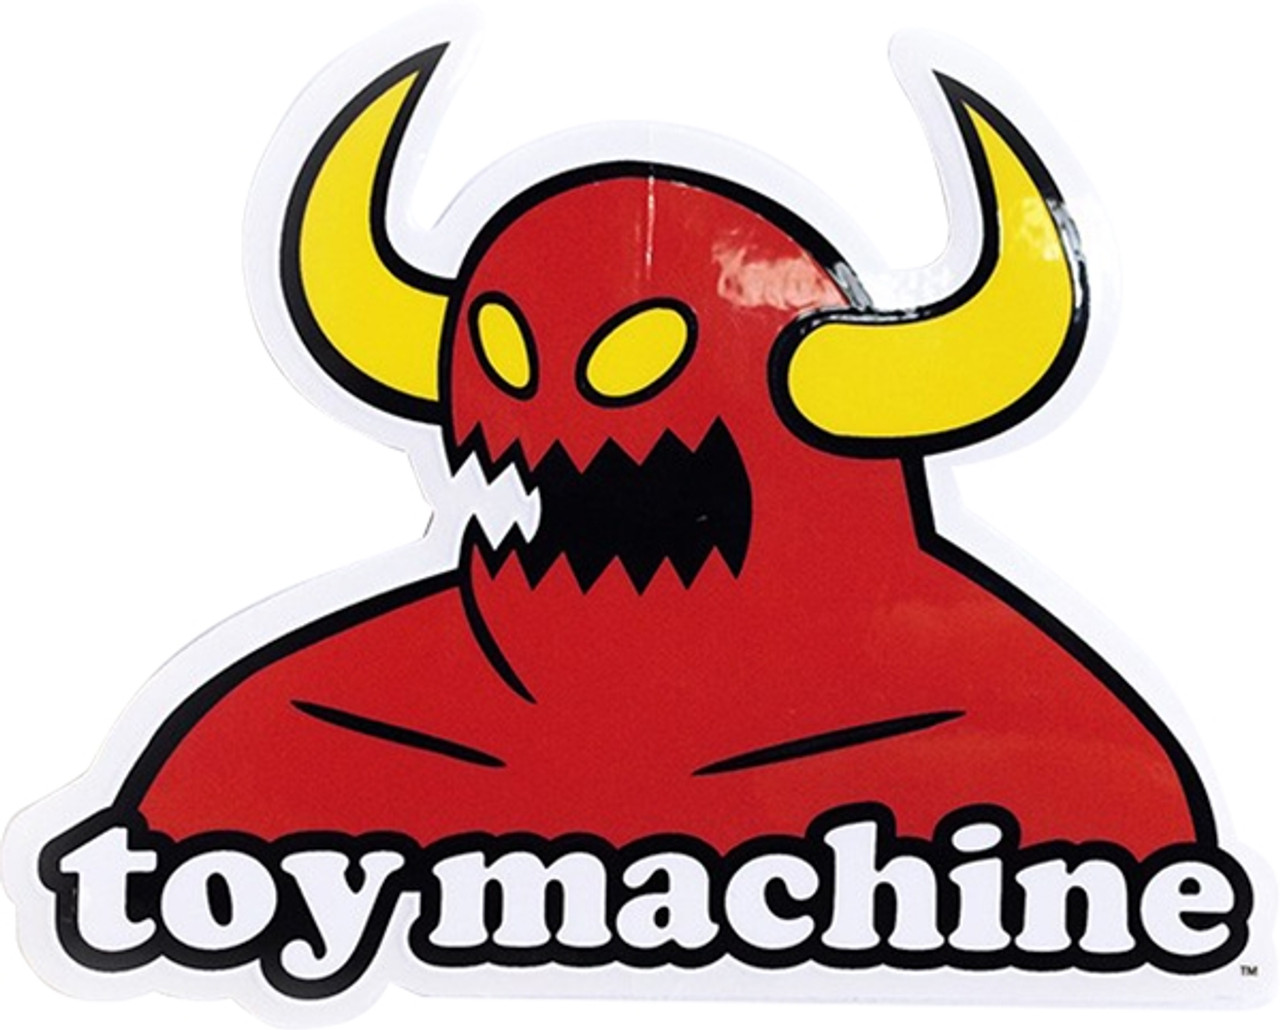 TOY MACHINE MONSTER DECAL STICKER (2 pack)